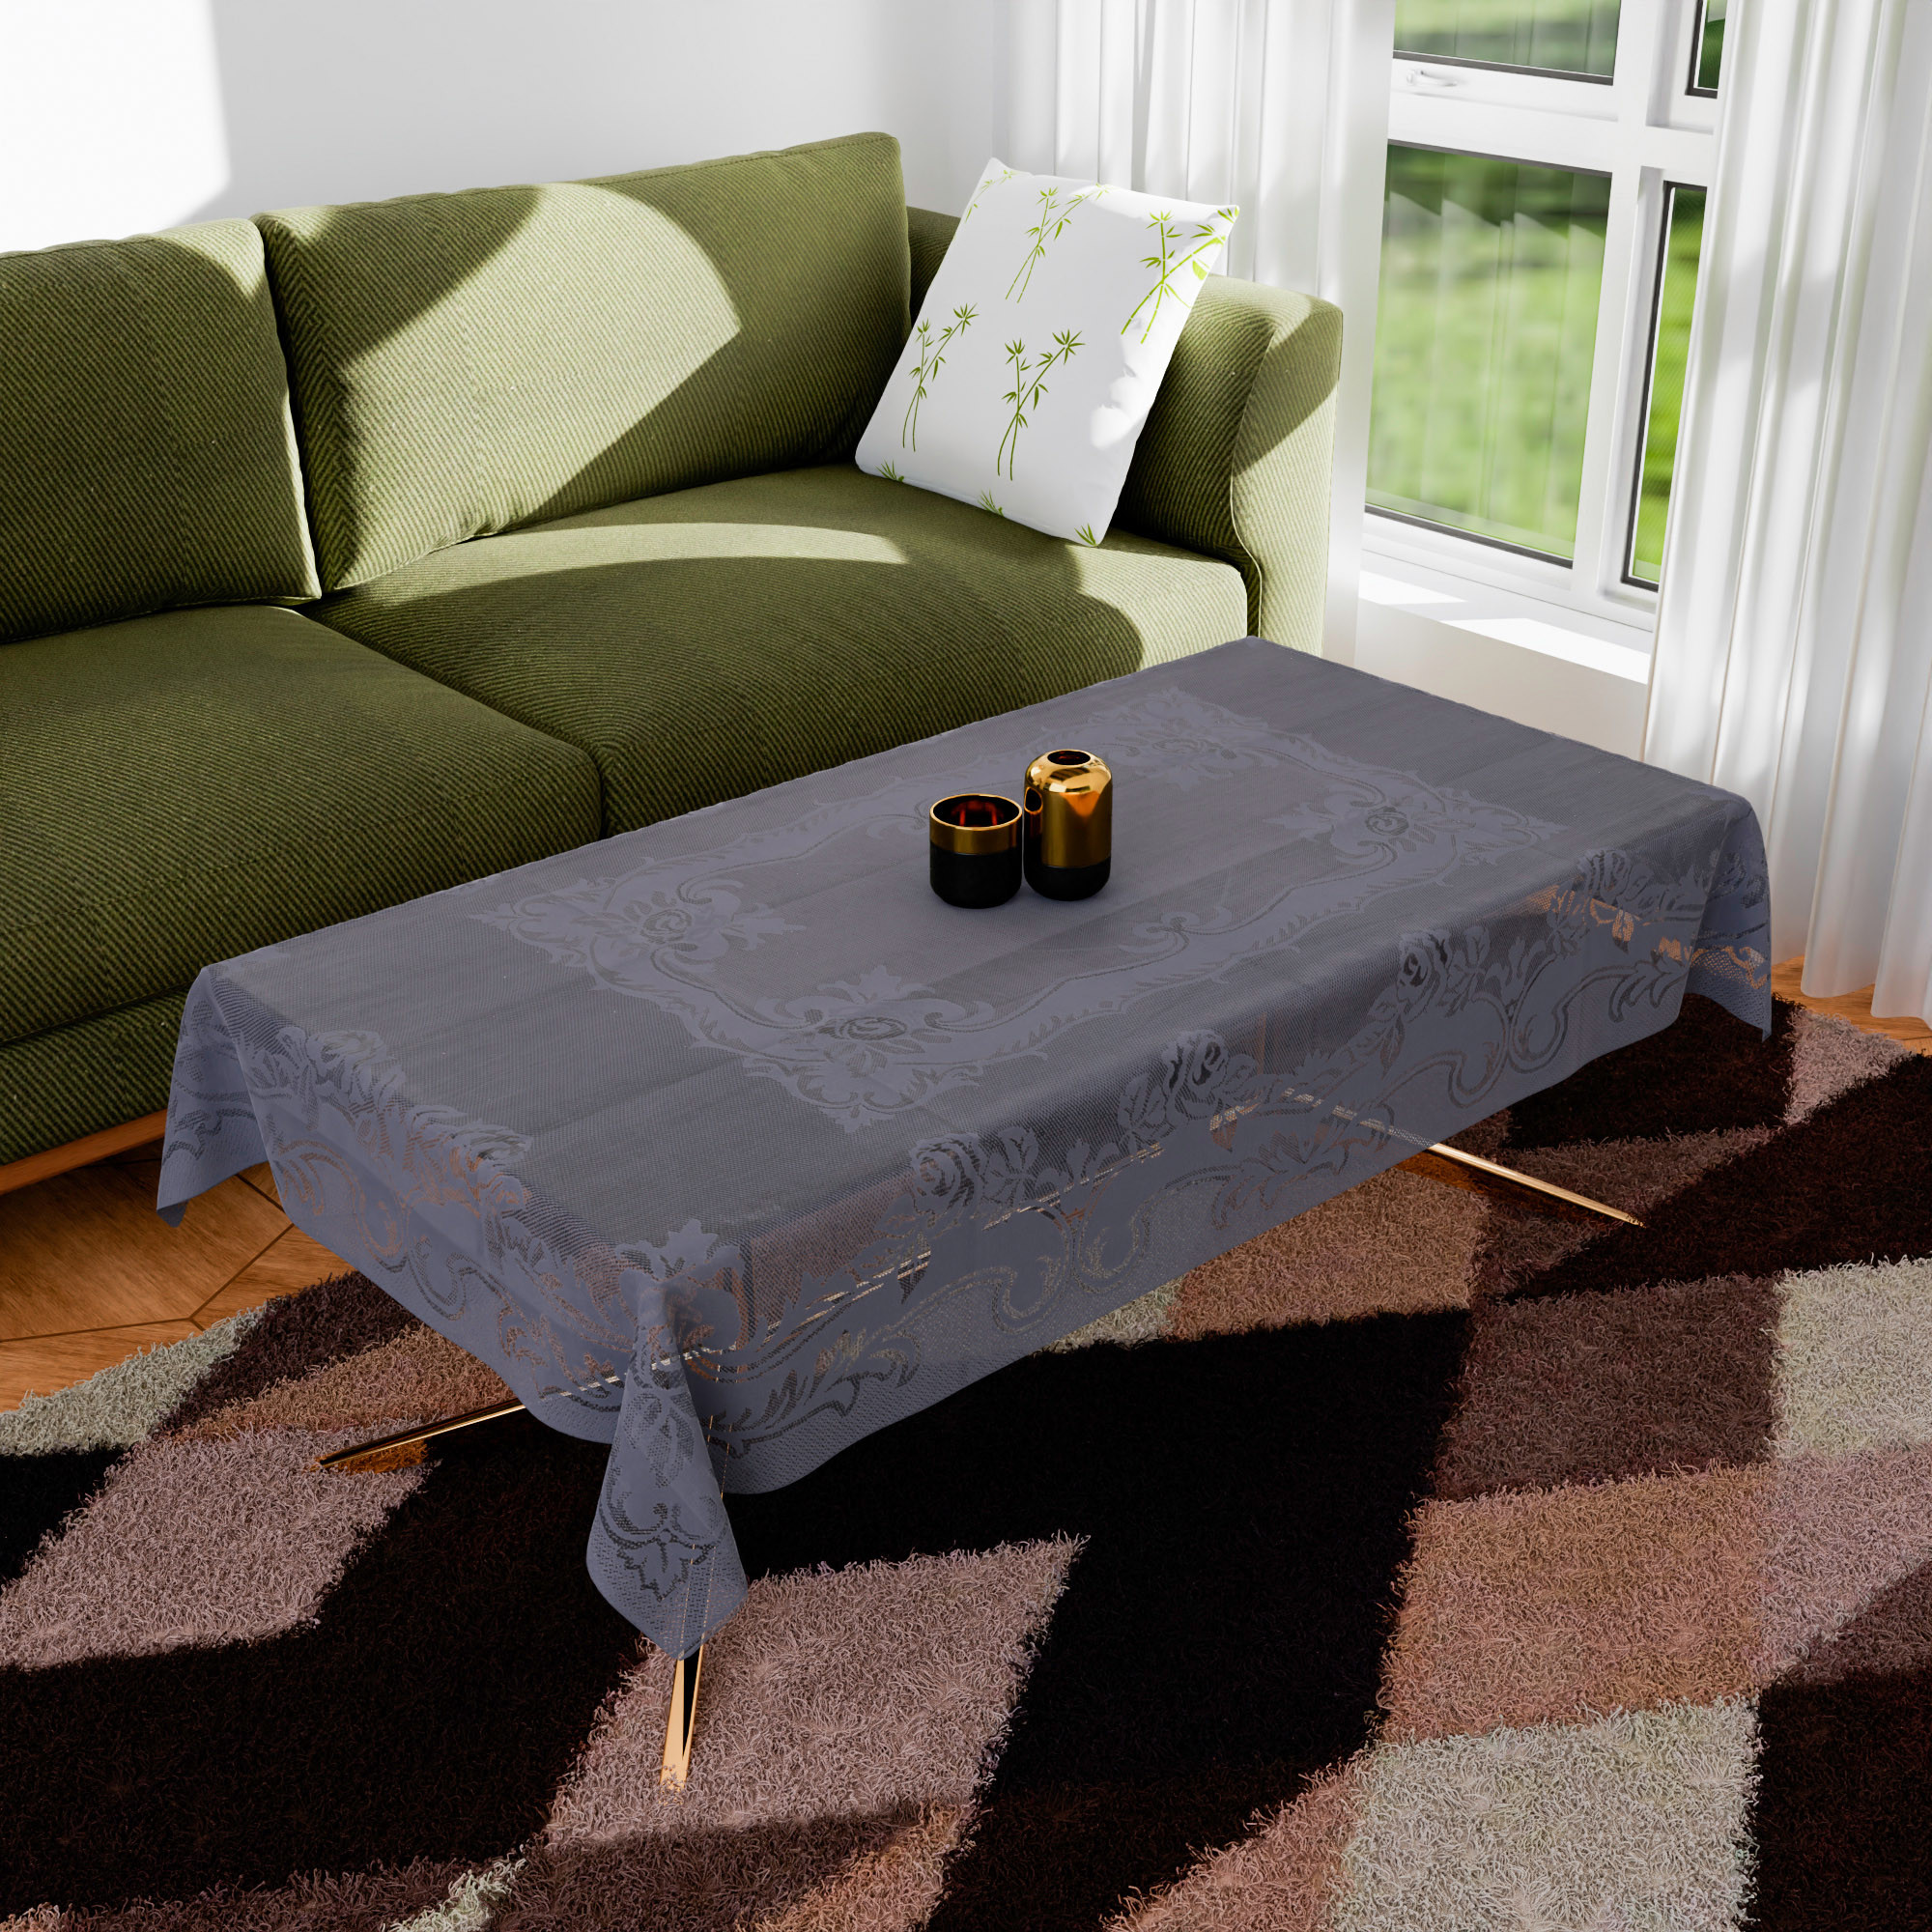 Kuber Industries Center Table Cover | Cotton Table Cloth Cover | 4-Seater Table Cloth | Self Gulmohar Vila Table Cover | Table Protector | Table Cover for Center Table | 40x60 Inch | Gray